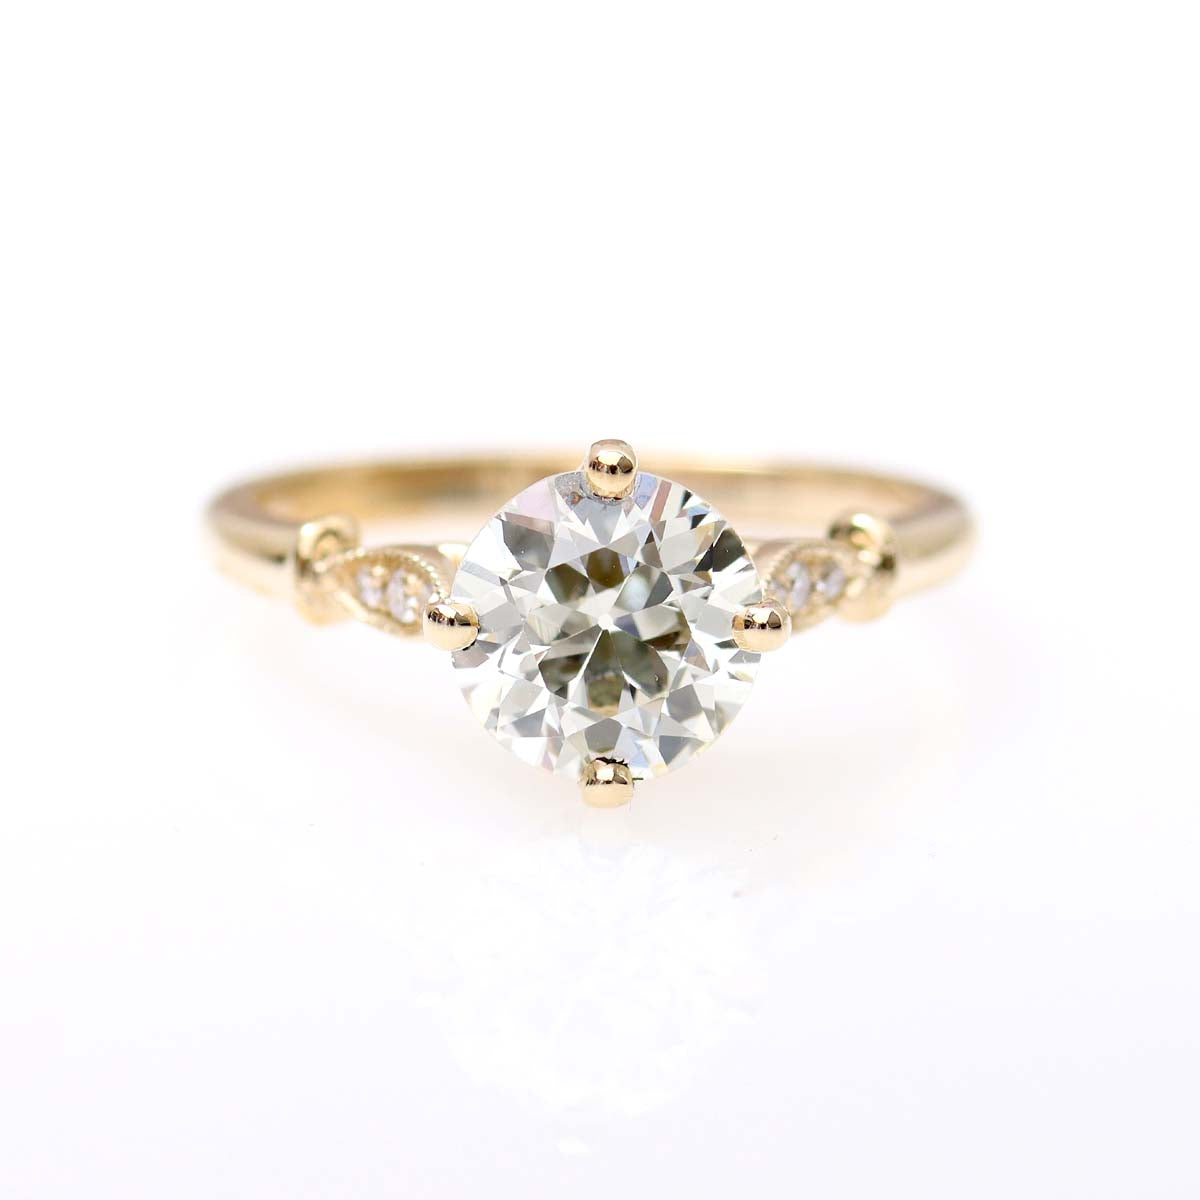 The Zoe Edwardian Inspired Old European Cut Engagement Ring #3606-1